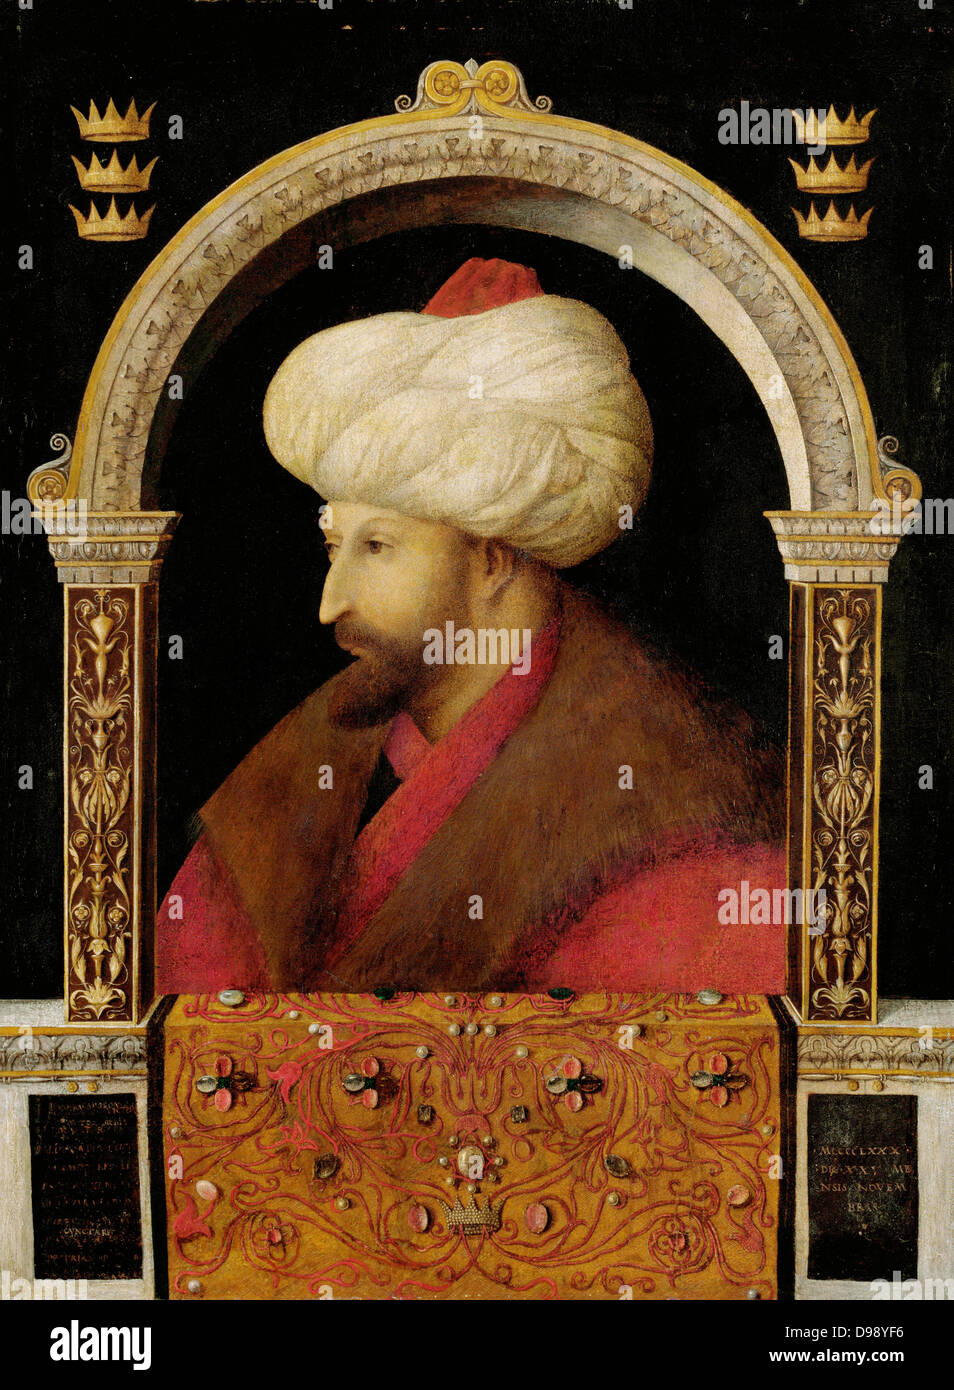 Mehmet II (March 30, 1432 – May 3, 1481) (also known as el-F?ti? 'the Conqueror' Sultan of the Ottoman Empire (Rûm until the conquest) for a short time from 1444 to September 1446, and later from February 1451 to 1481. Portrait of Mehmet II by Venetian artist Gentile Bellini Stock Photo